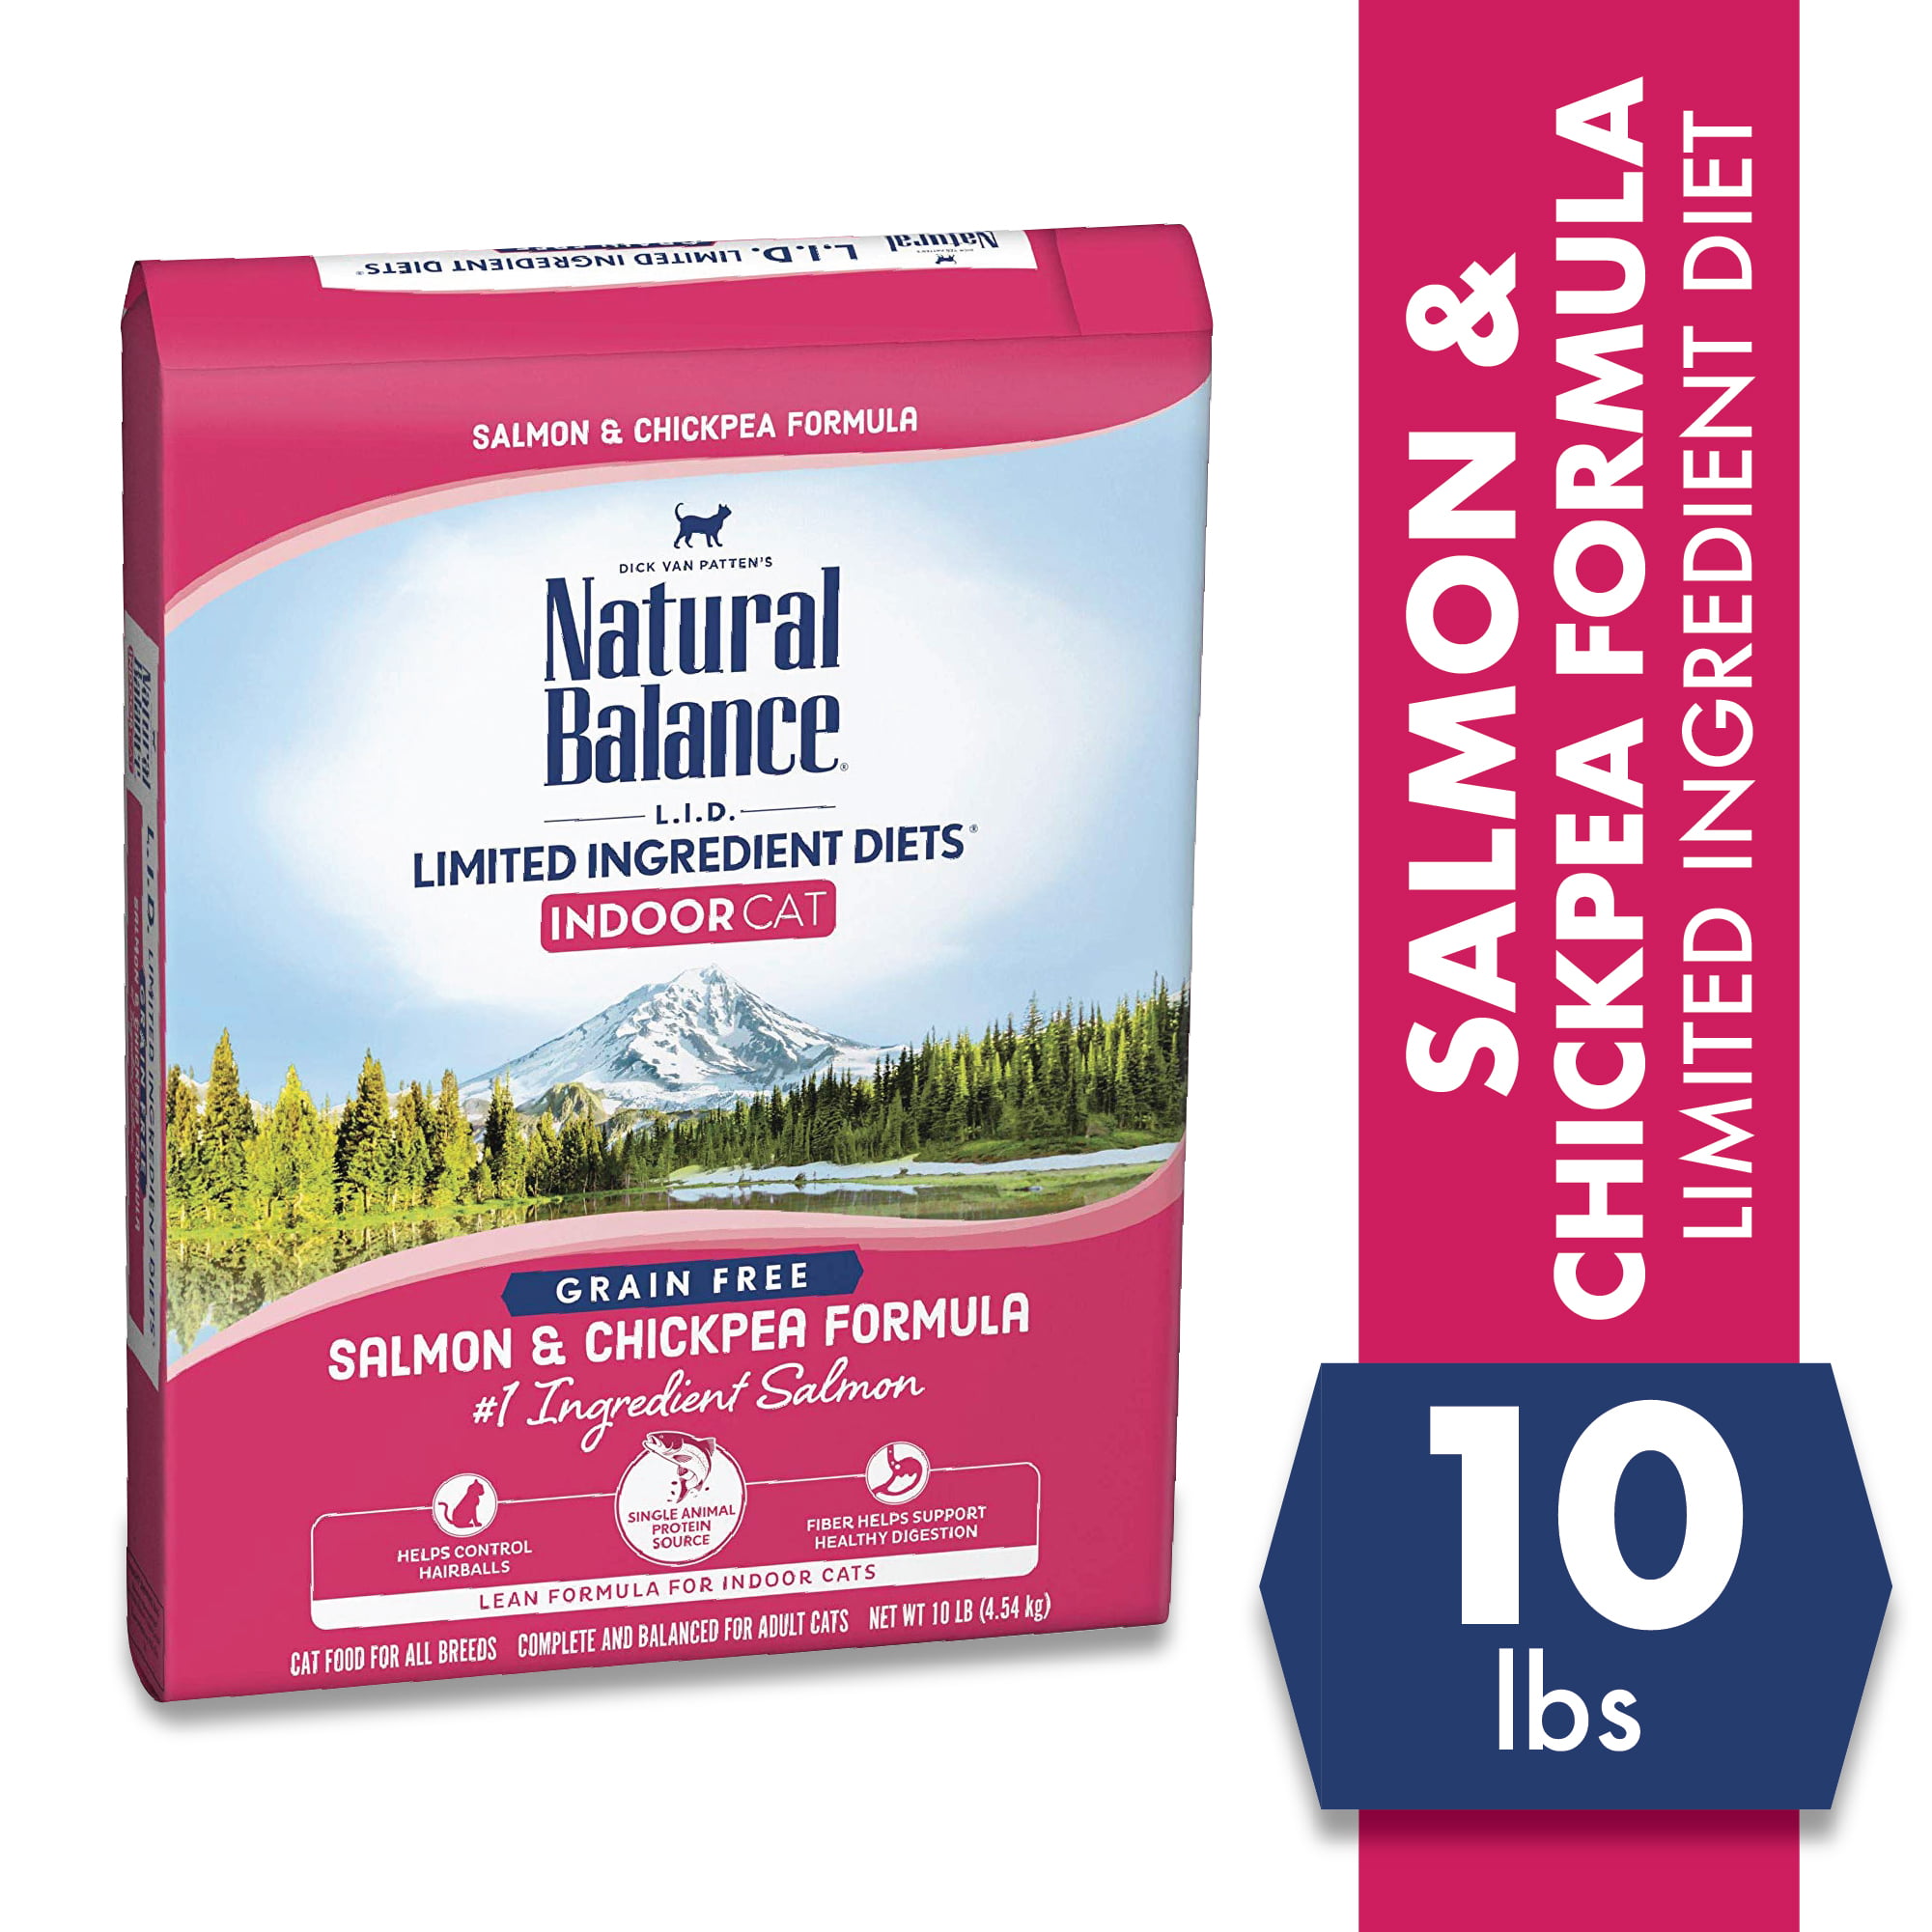 Natural Balance Limited Ingredient Diets Dry Cat Food for Indoor Cats